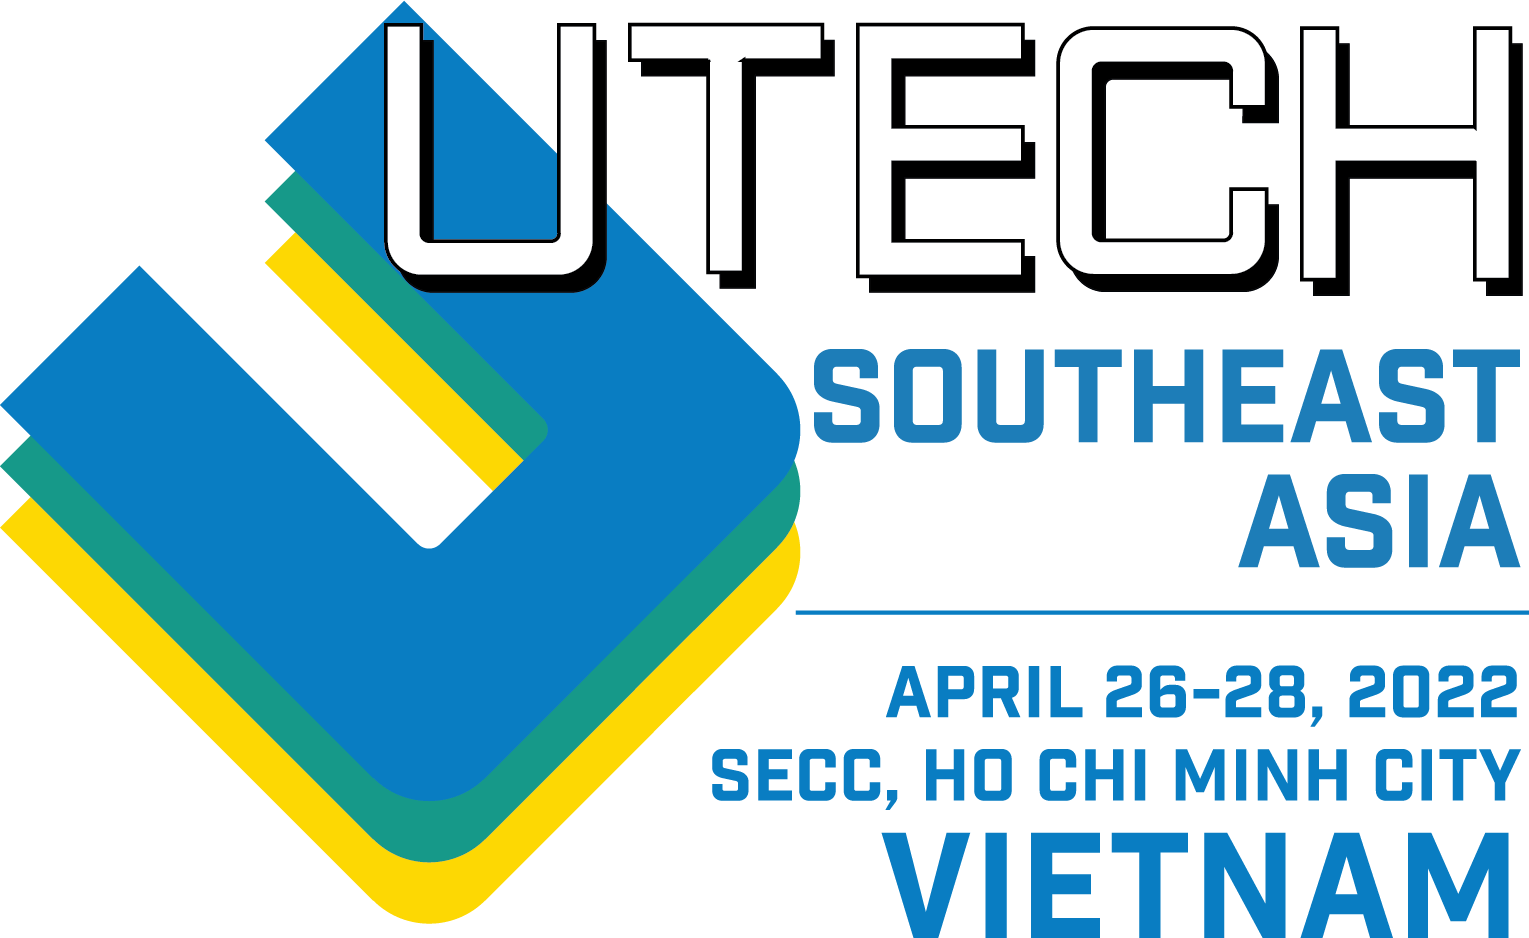 UTECH Southeast Asia Polyurethane Exhibition & Conference to Launch in